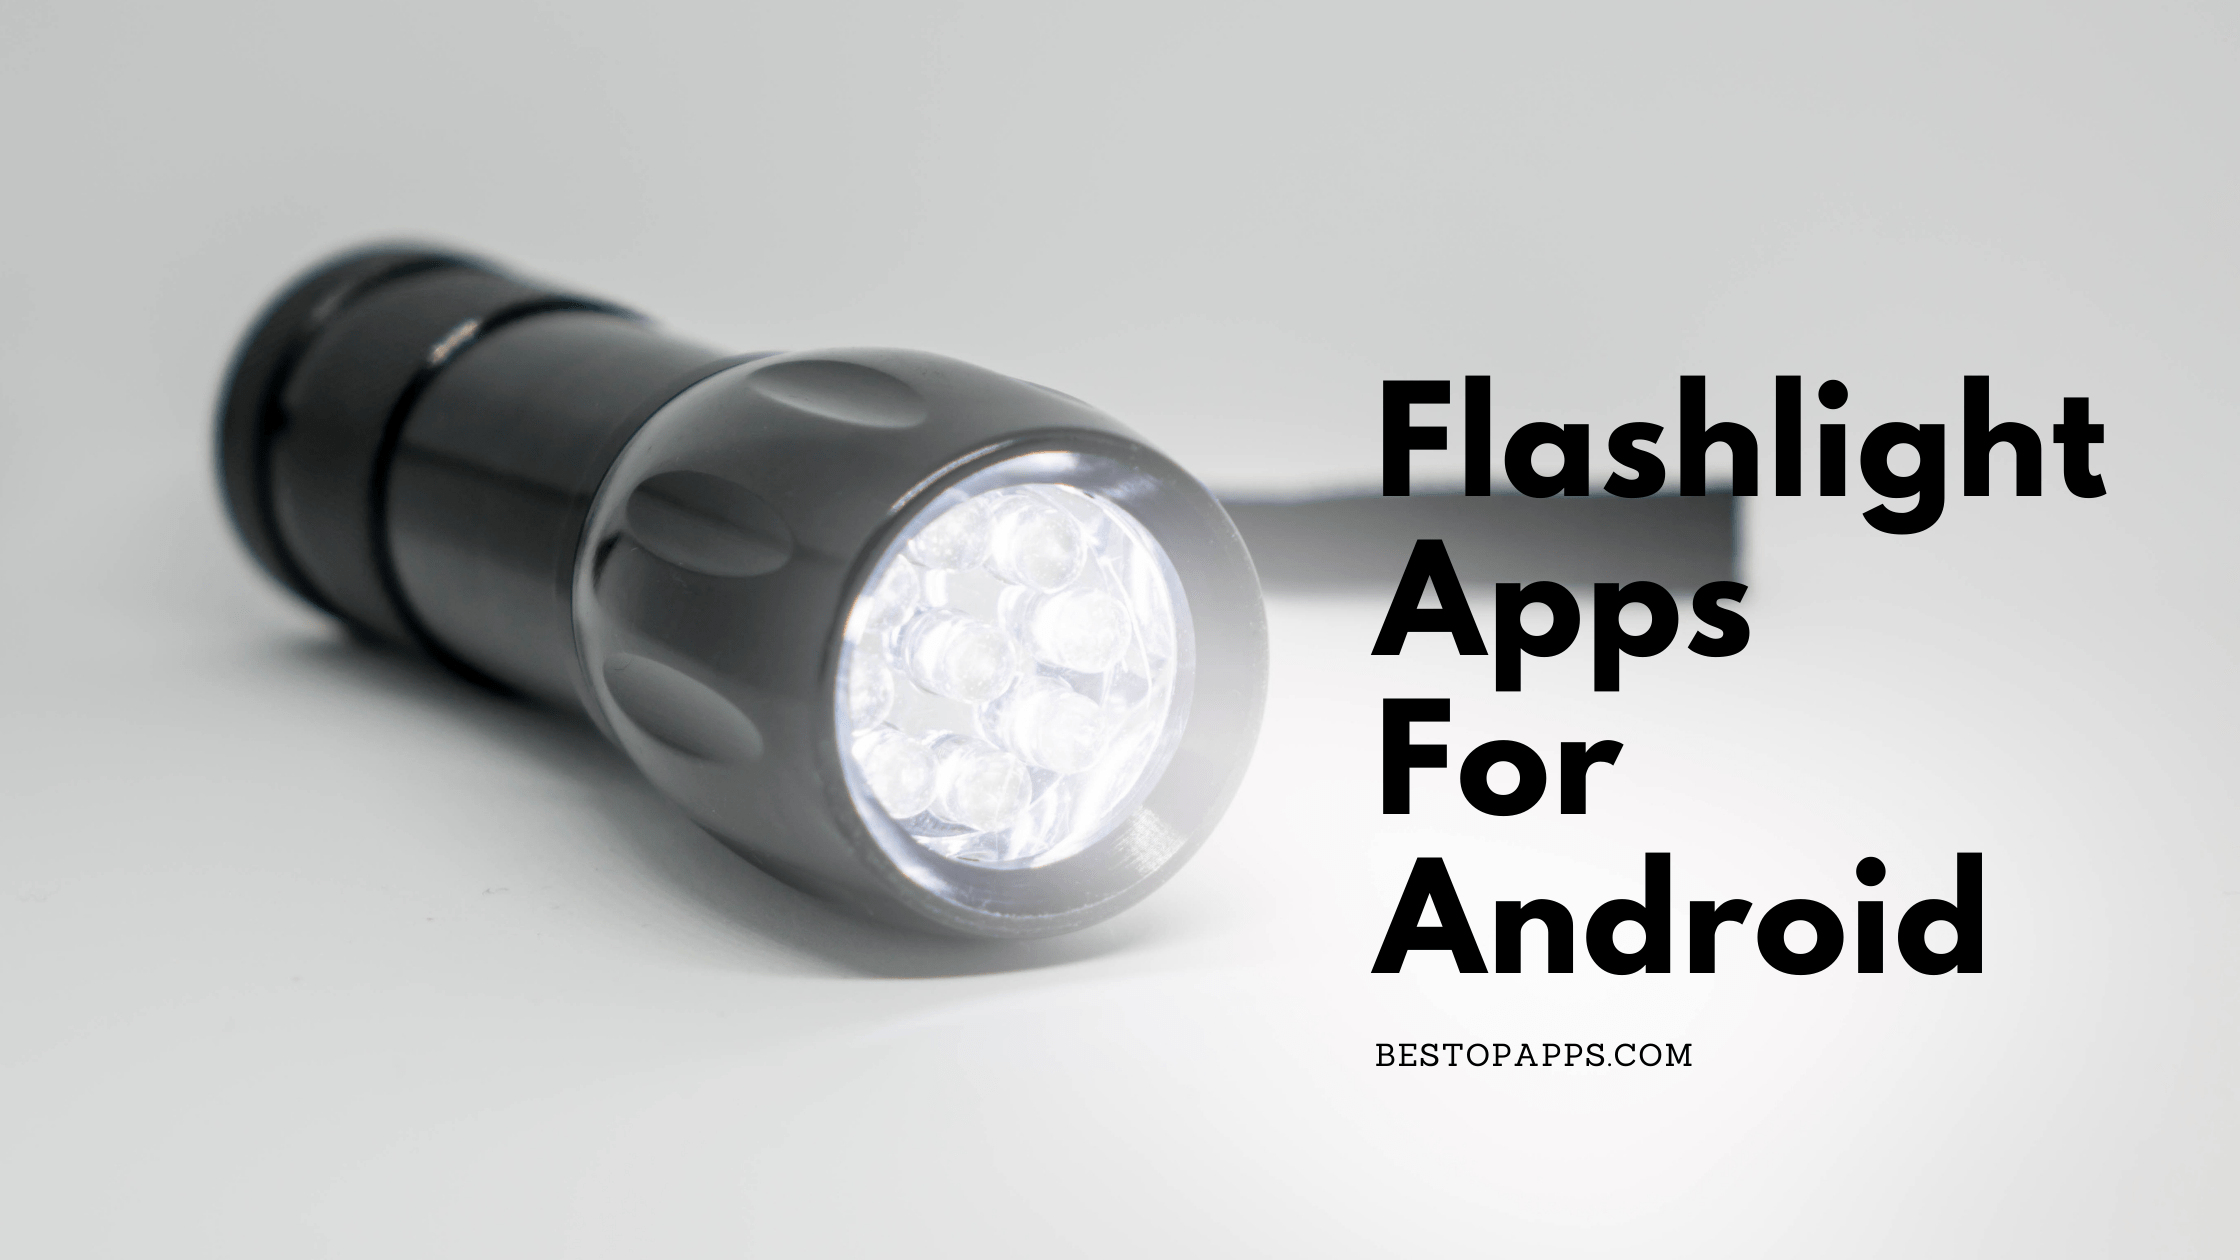 Flashlight Apps For Android